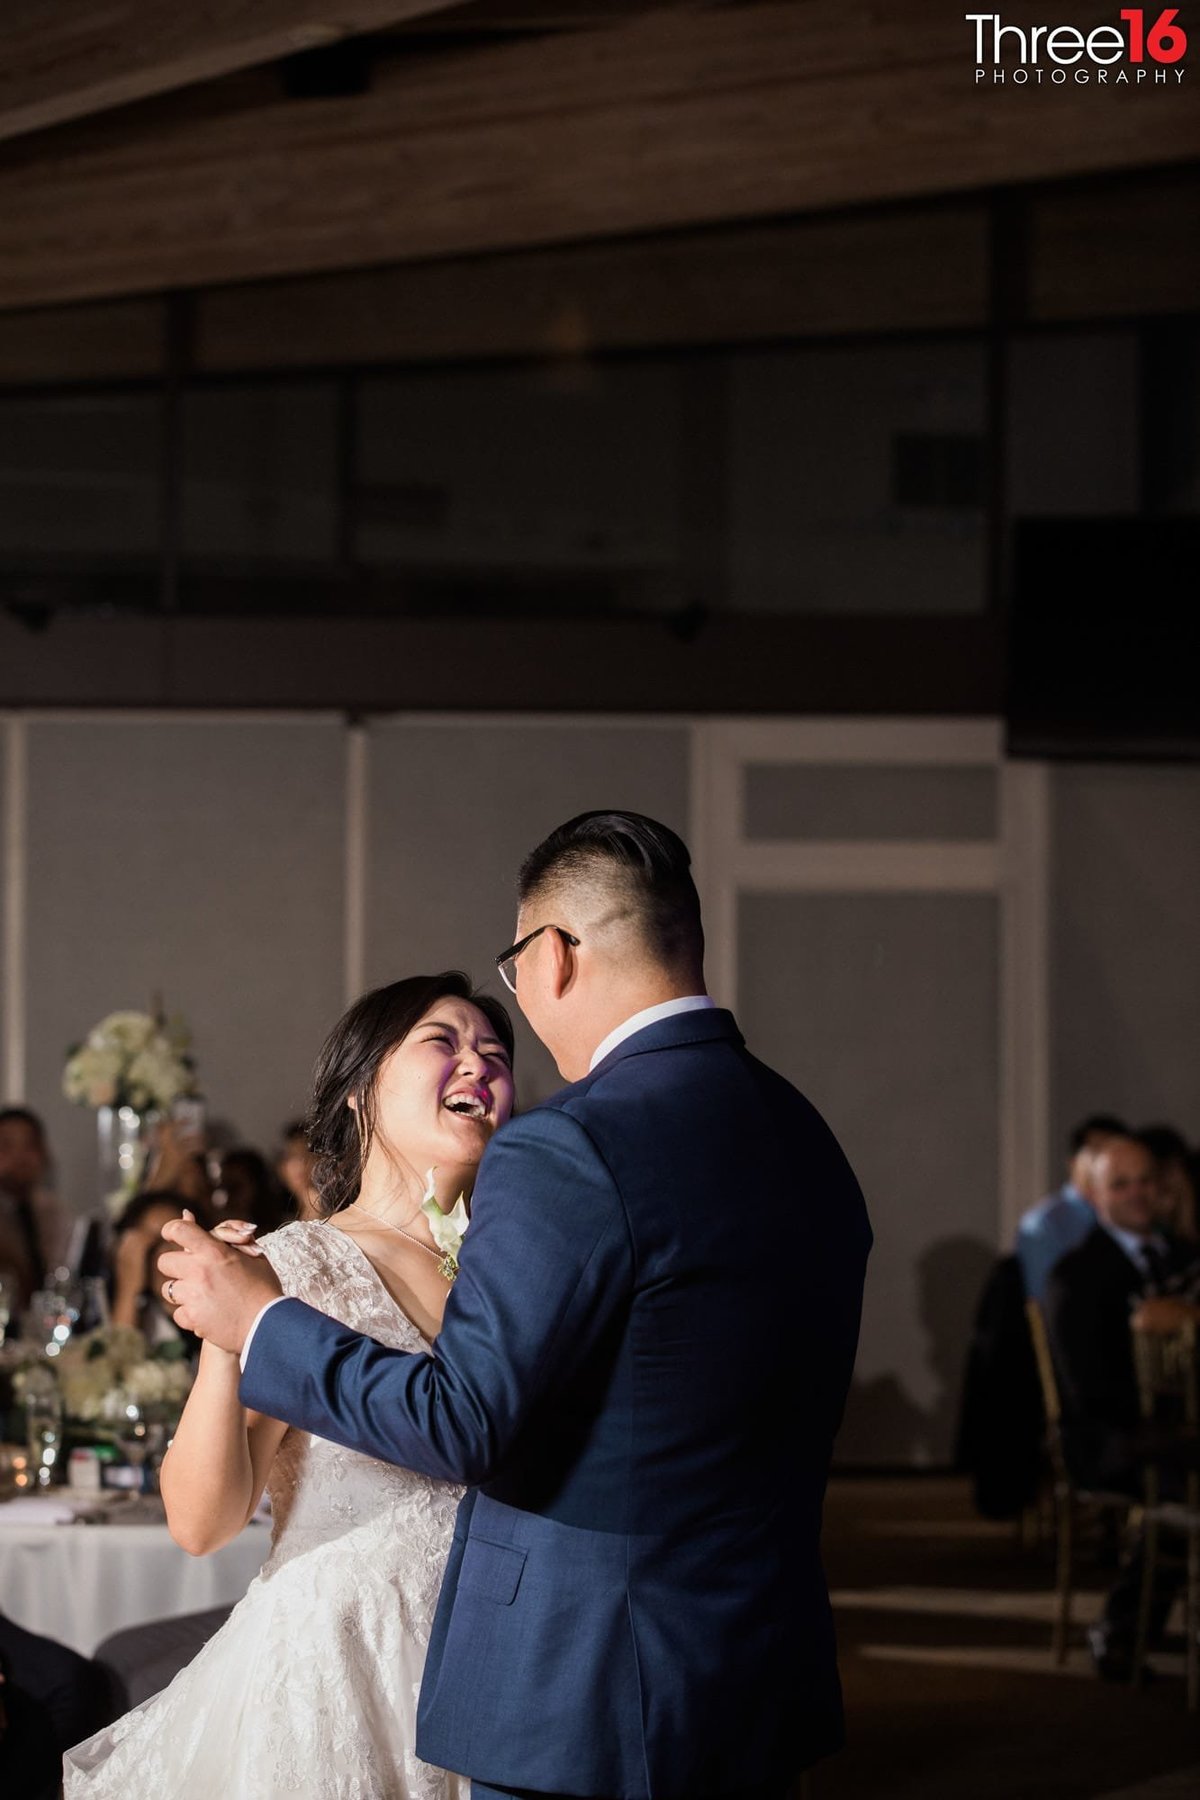 Bride laughs with her Groom during their First Dance